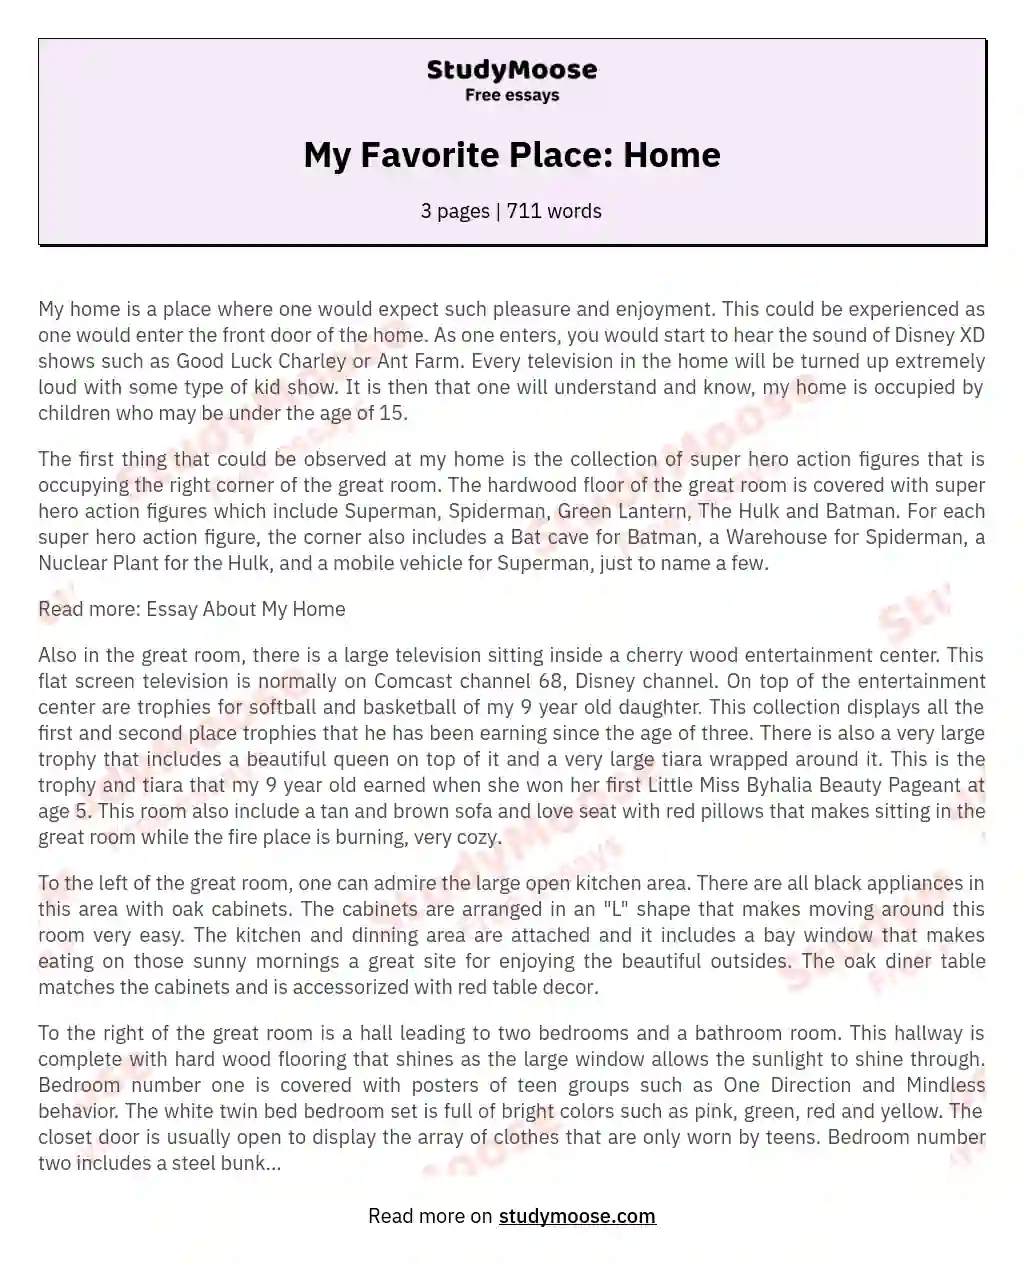 My Favorite Place: Home essay